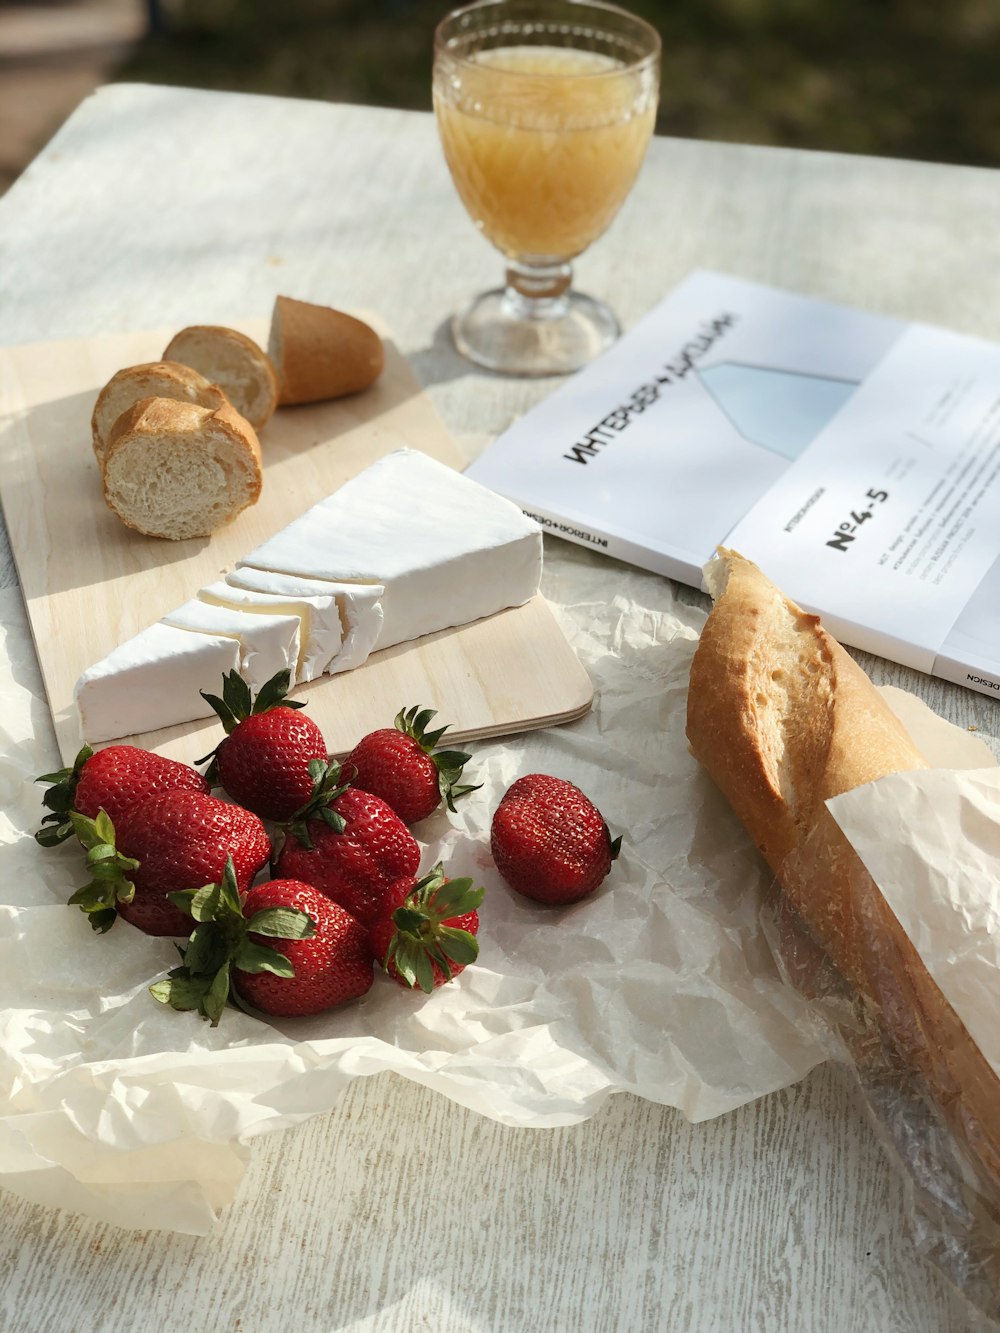 strawberries on white paper beside clear wine glass